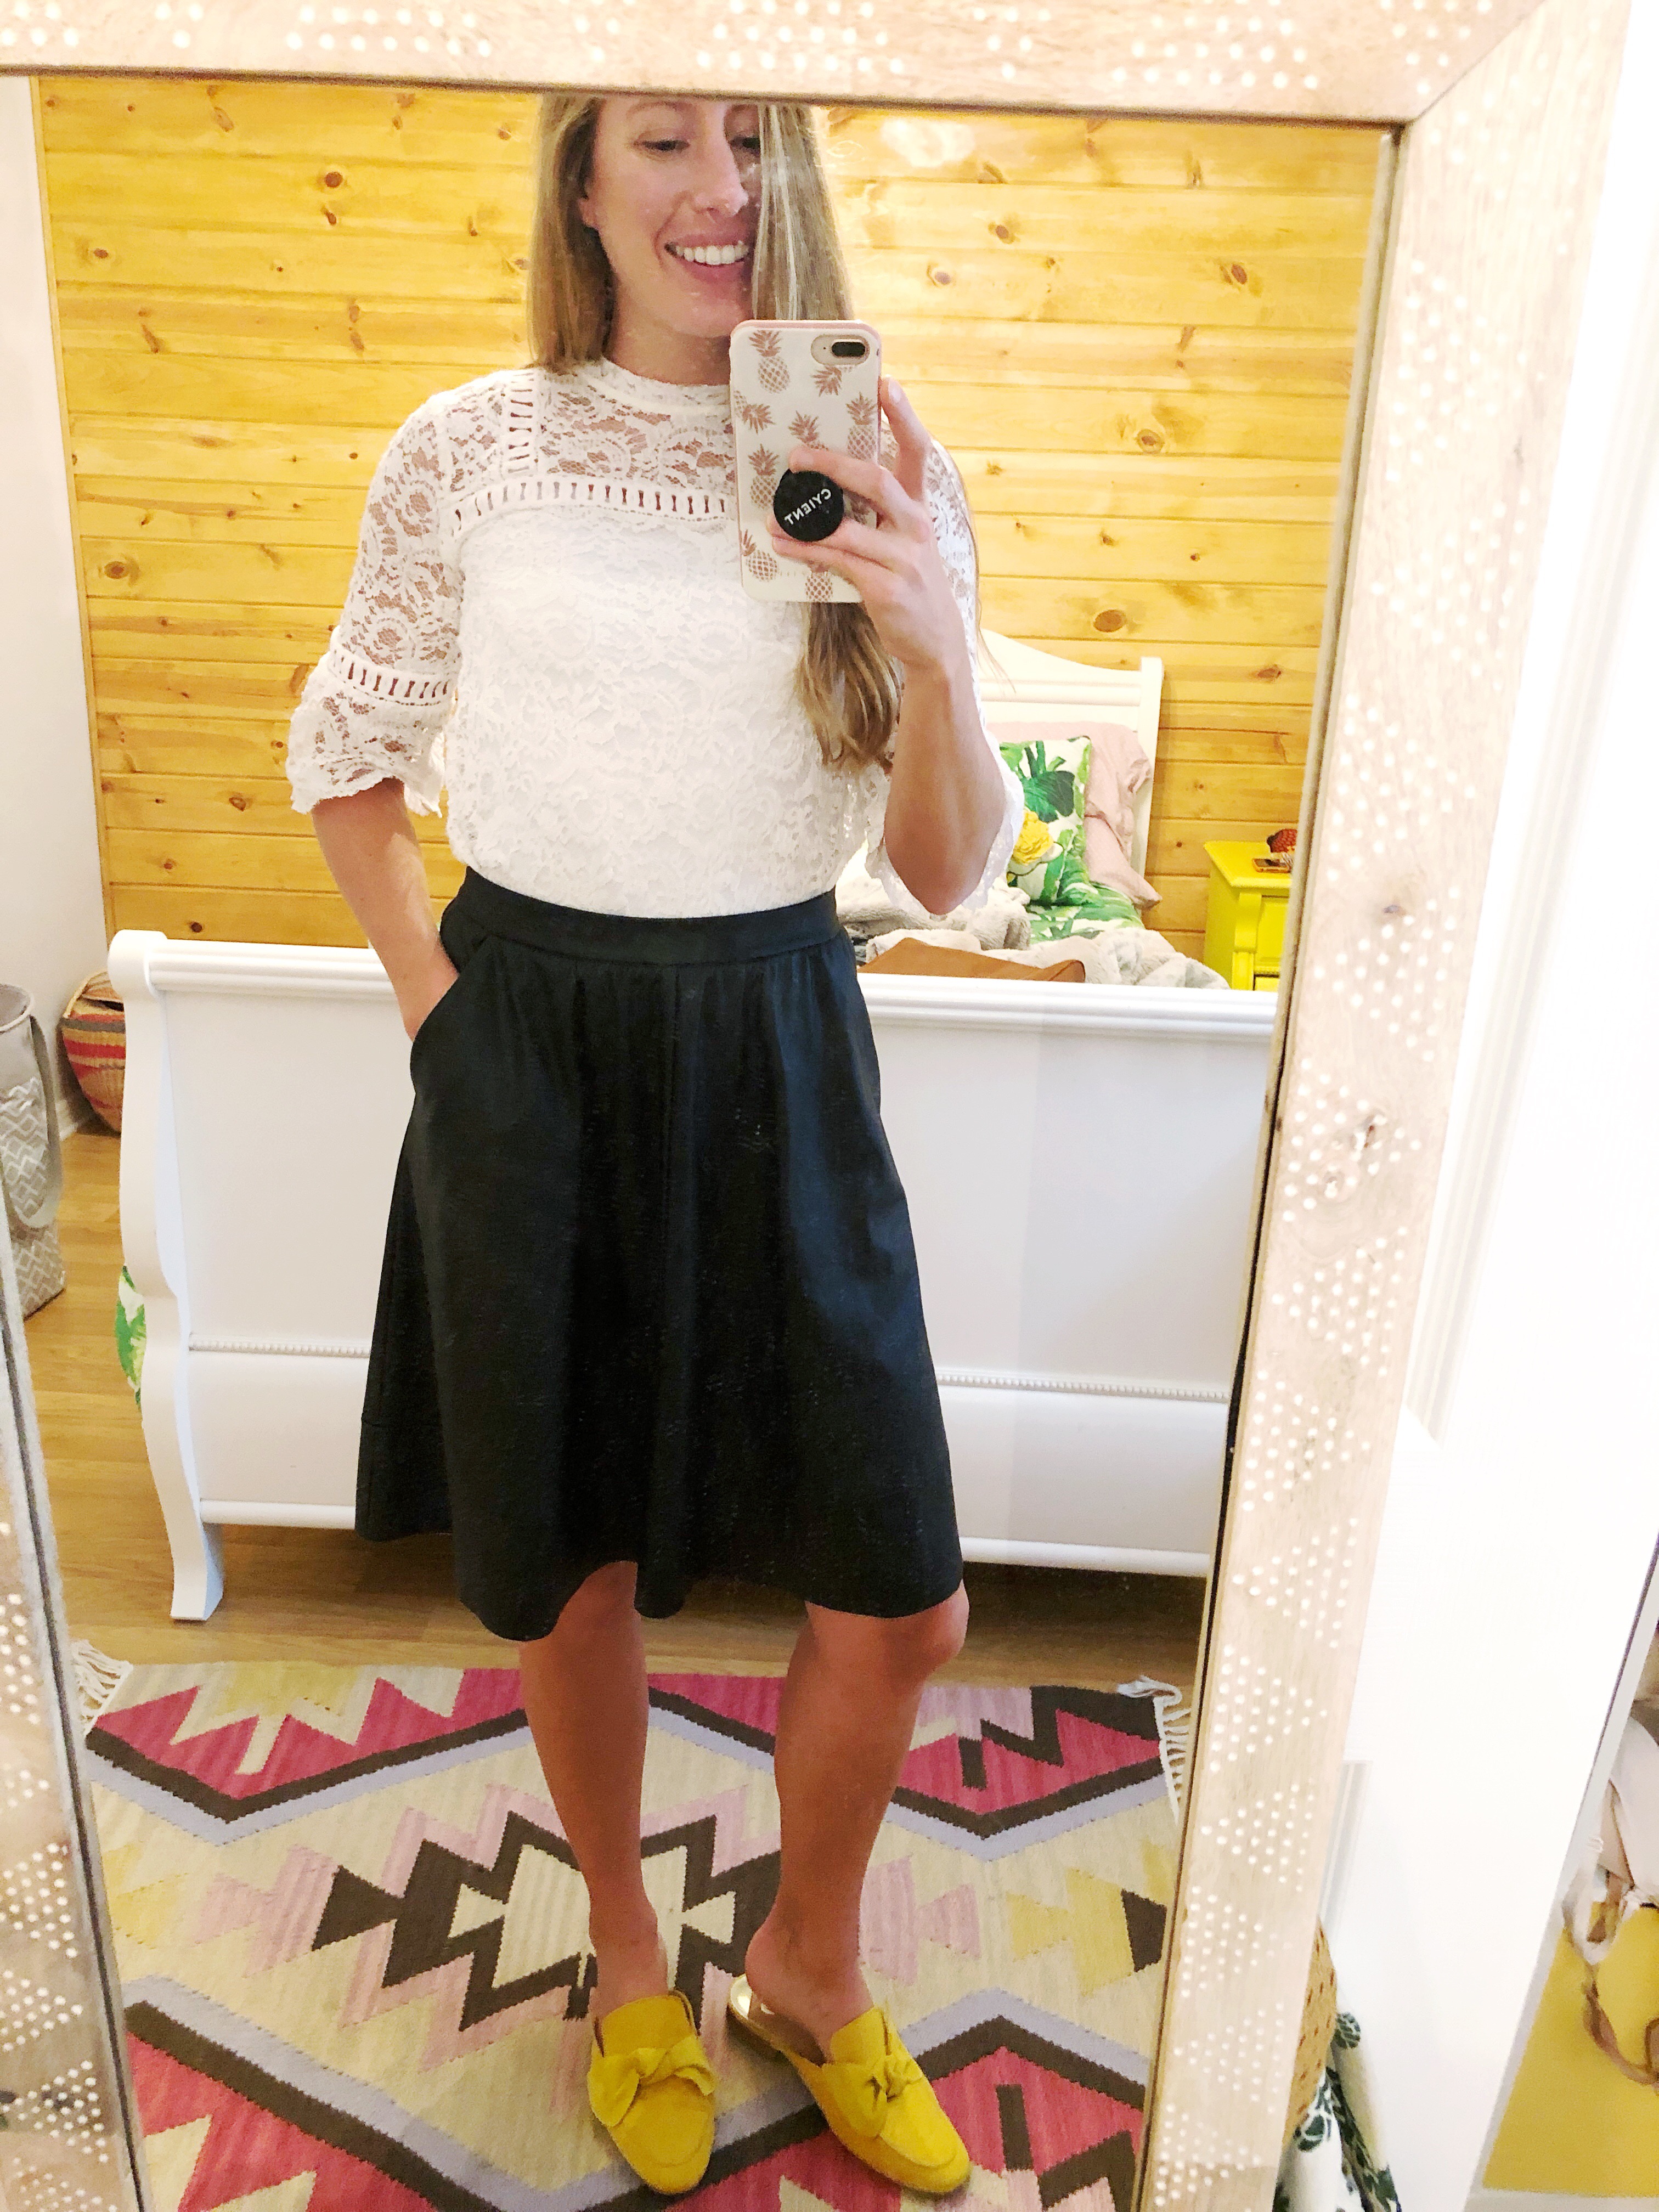 How to Style a Lace Top for Fall | How to Wear a Lace Top for Fall | Suede Skirt | Corduroy Skirt | How to Dress for Fall in Warm Weather | Fall Outfit Idea | Casual Fall Outfit | Lace Top, Black Leather Skirt, Yellow Backless Loafers - Sunshine Style, Florida Fashion Blog